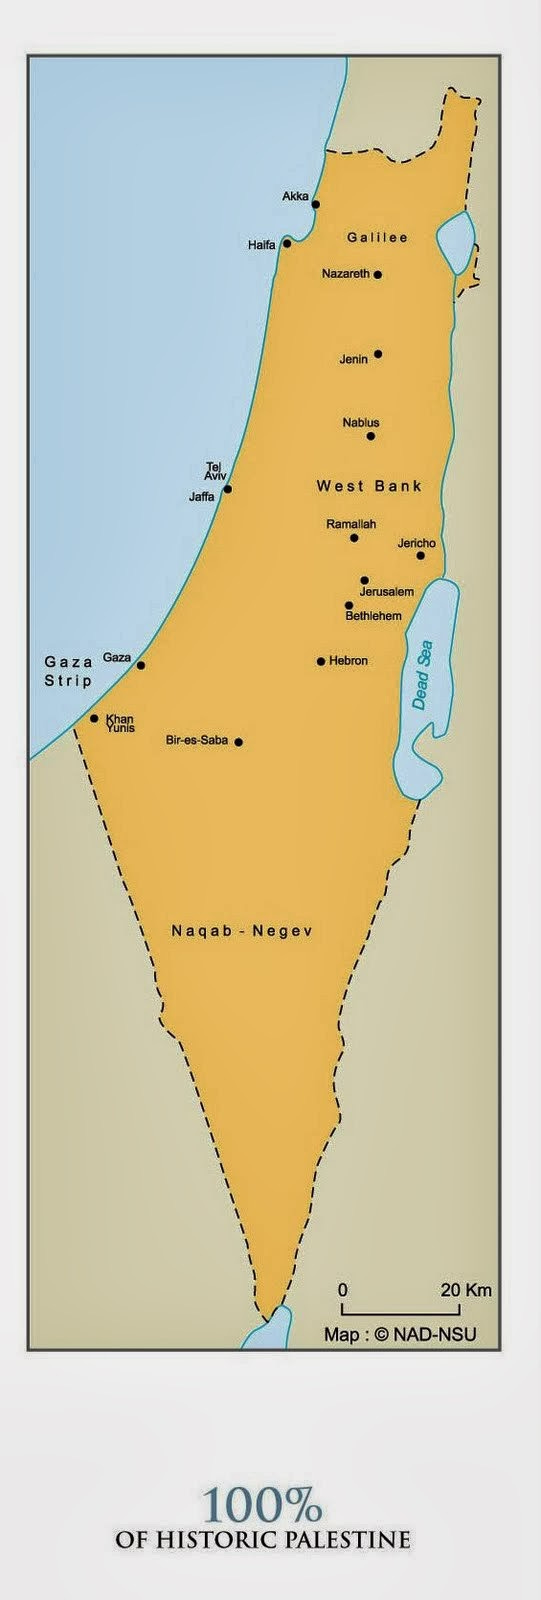 So this is what "historic Palestine" looked like ~ Elder Of Ziyon ...